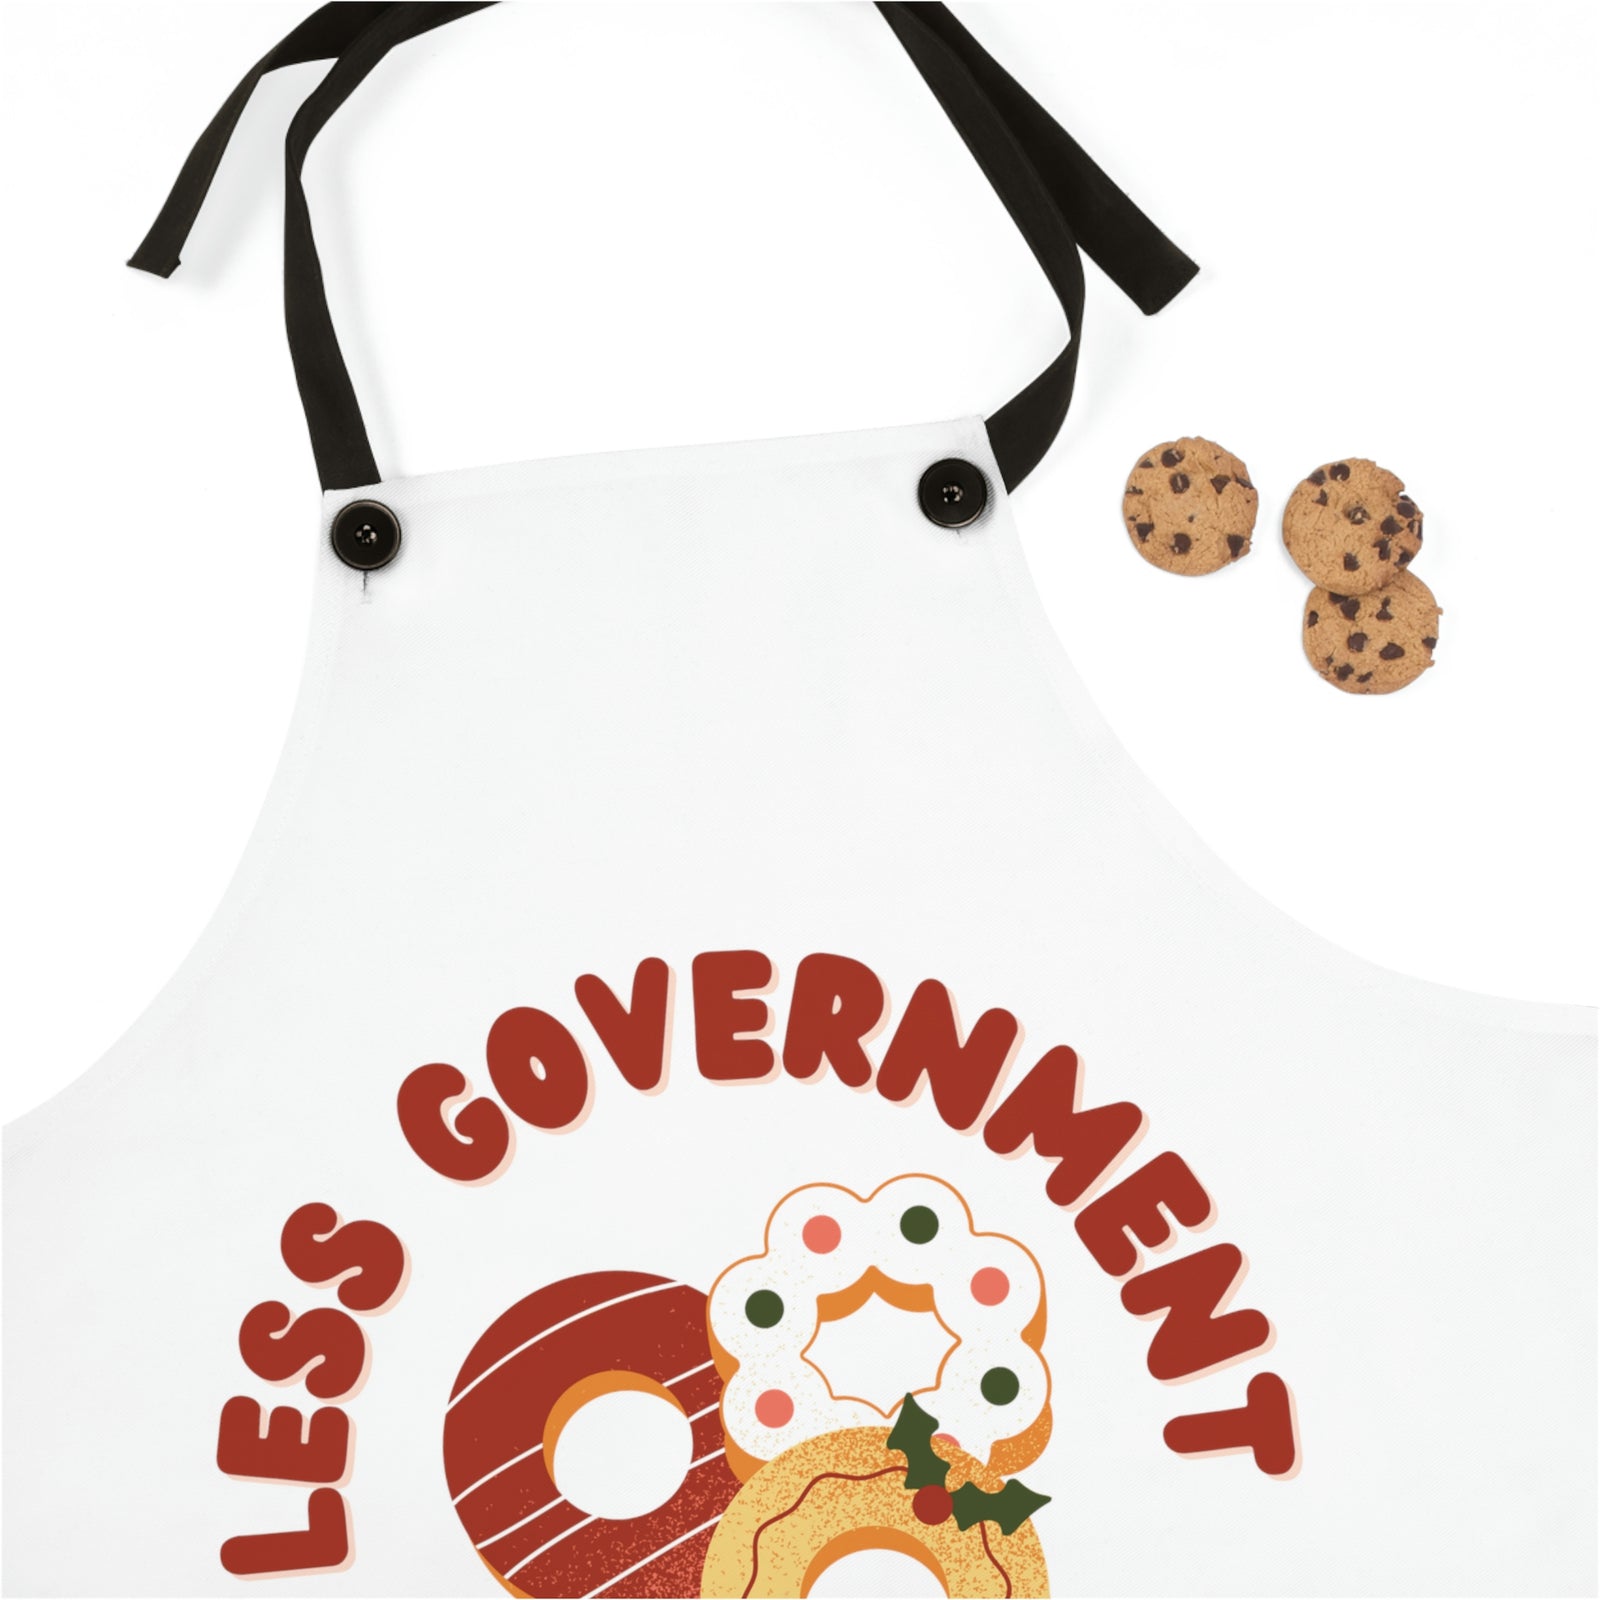 Less Government More Cookies Apron